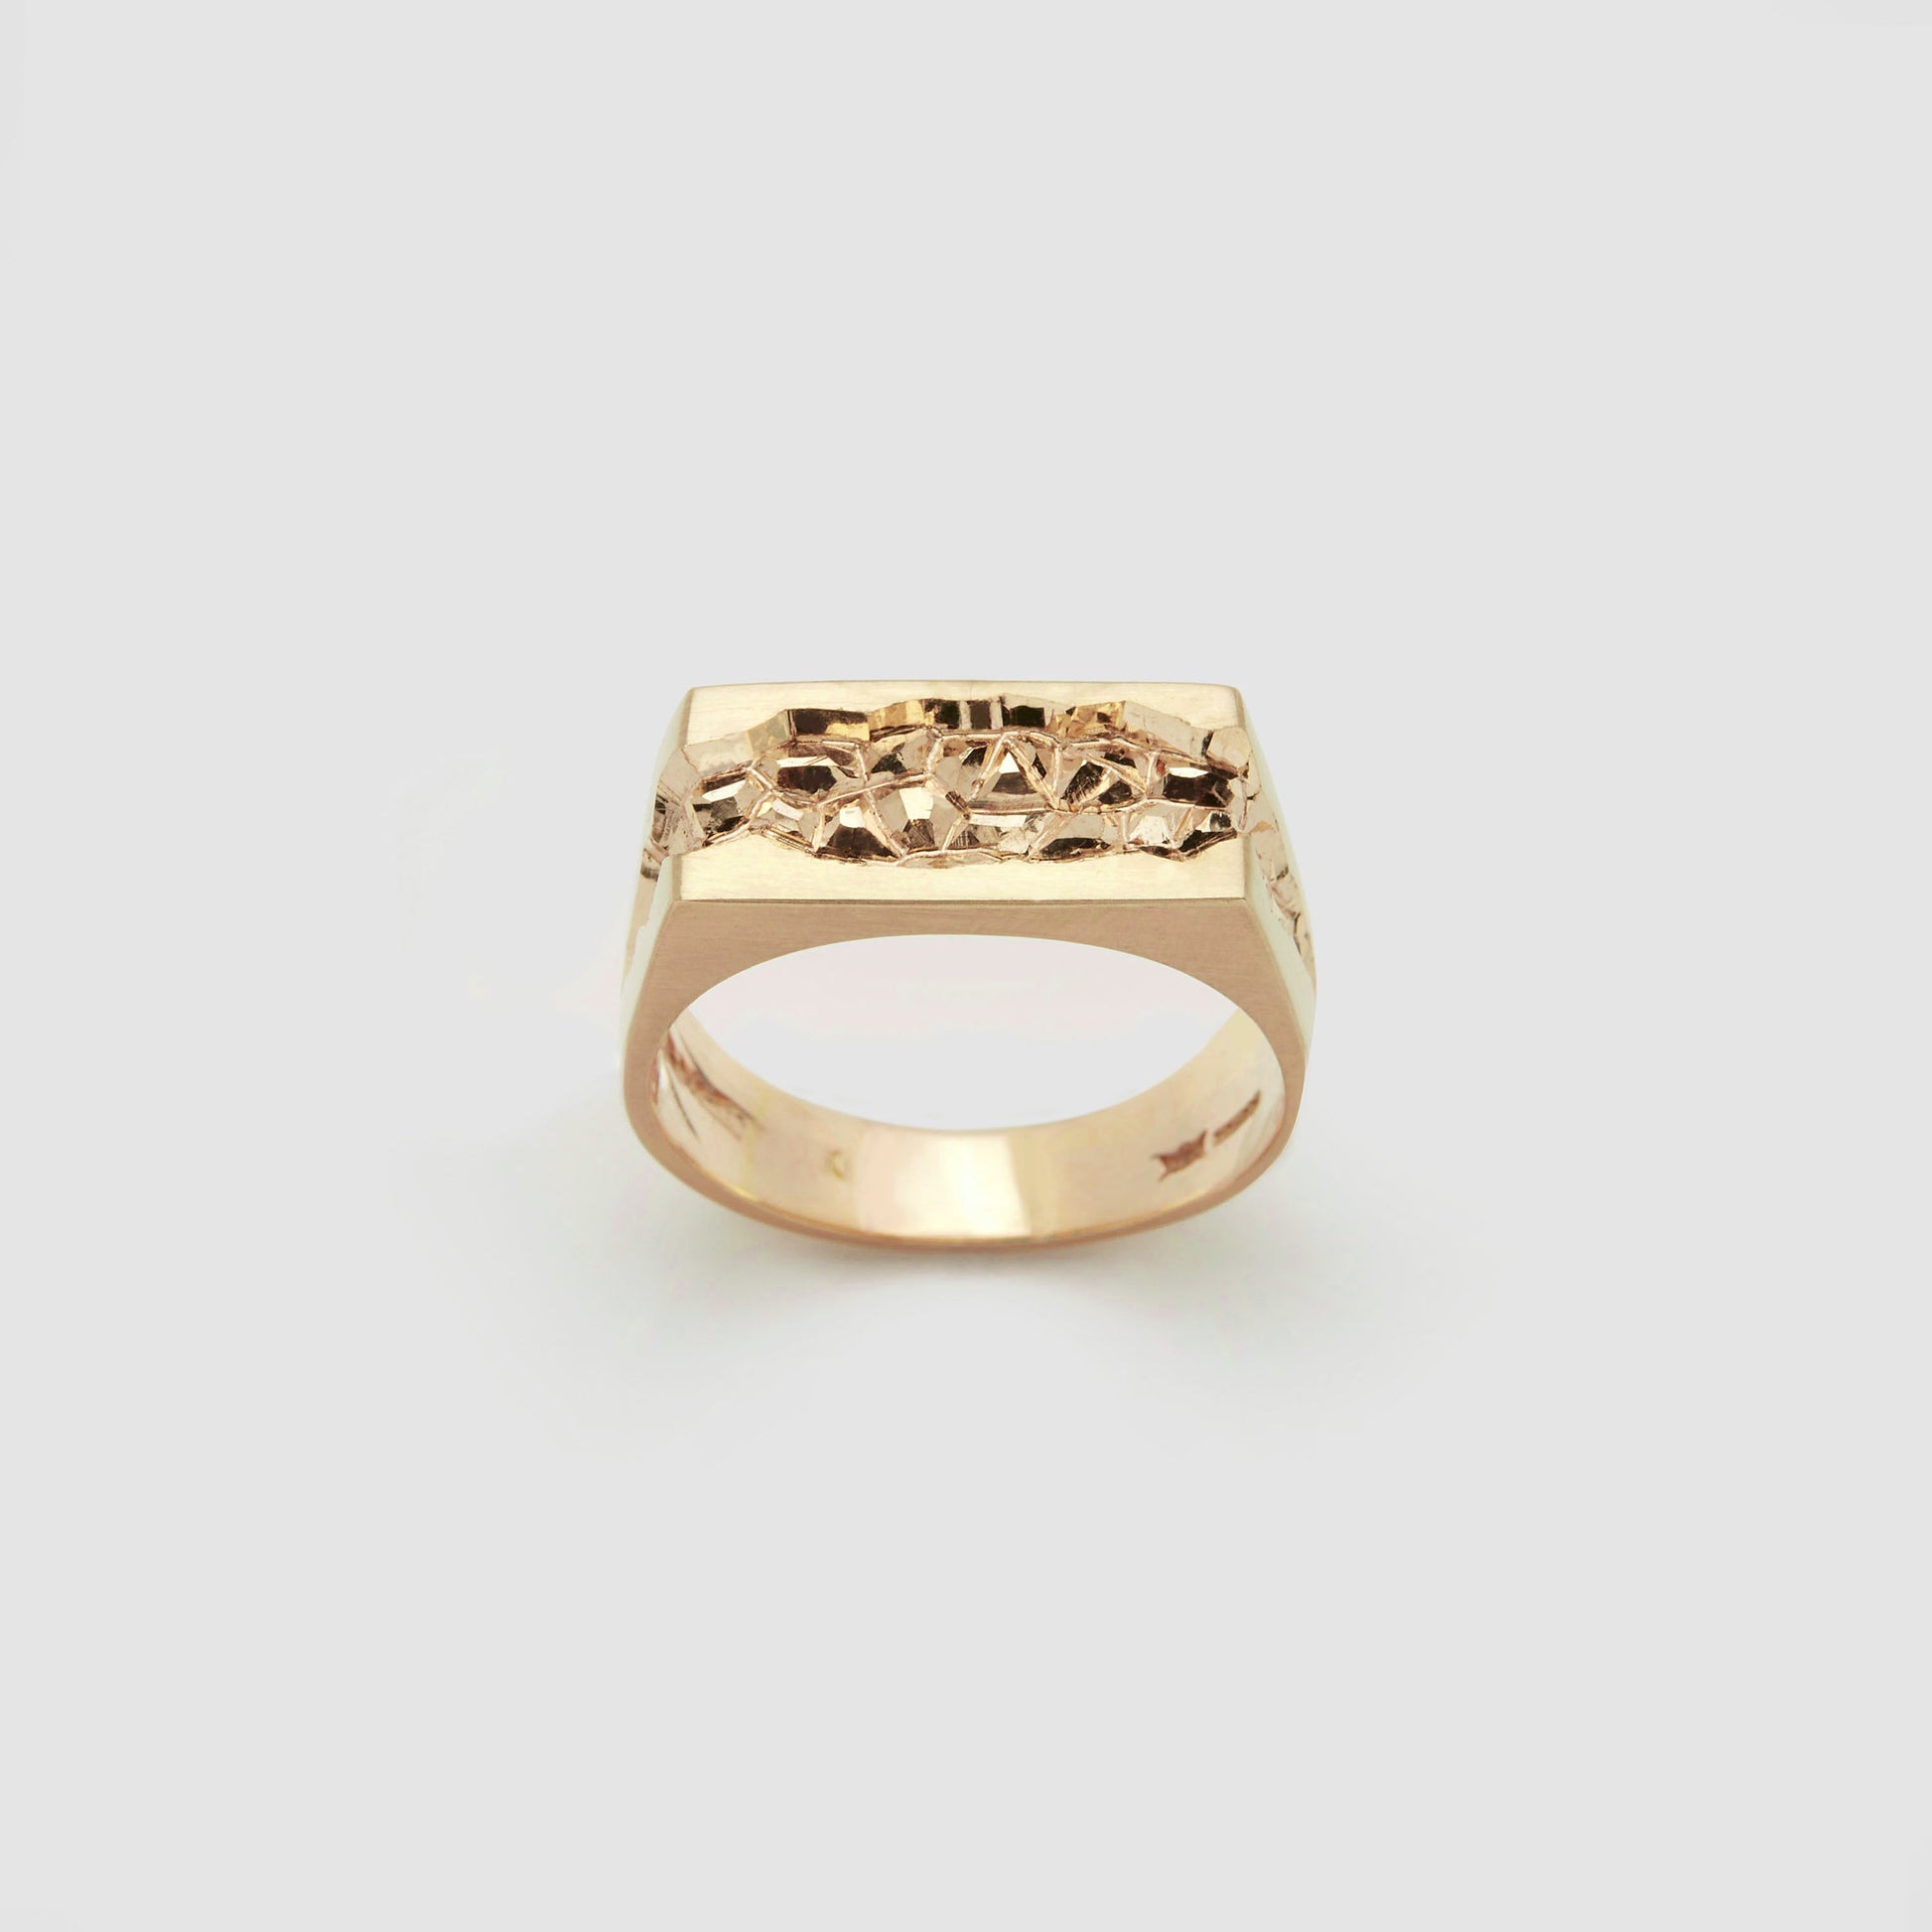 Castro Smith Jewelry Gold Japanese Chisel Hellsgate Ring.